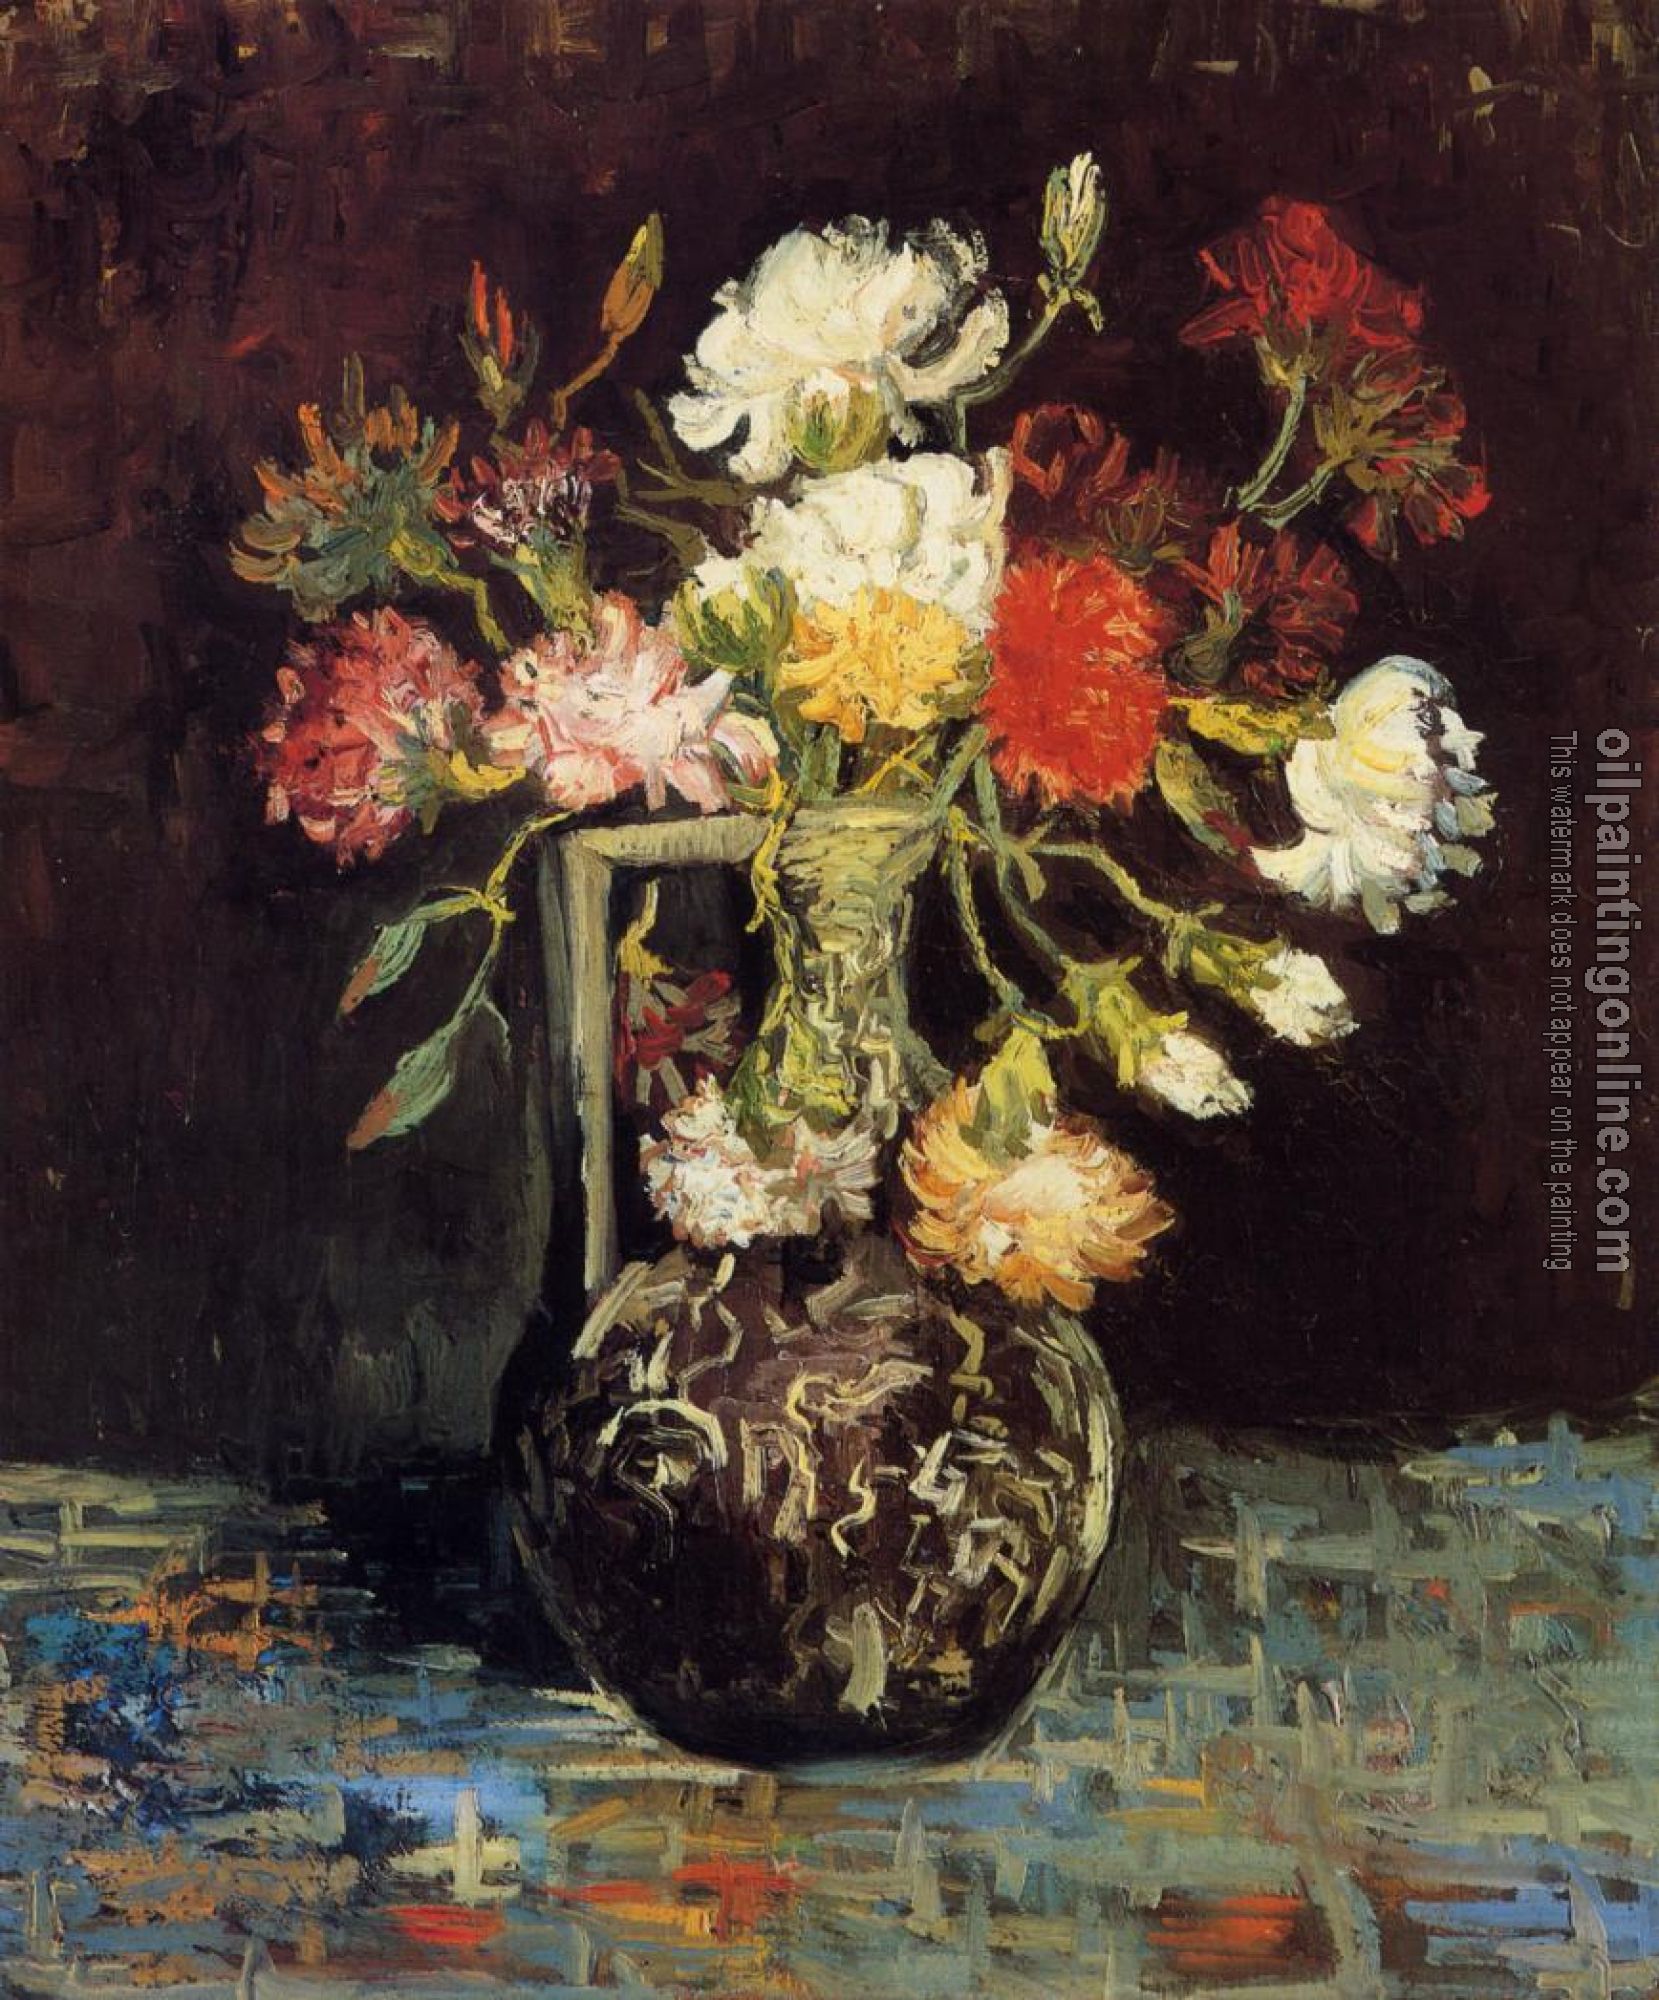 Gogh, Vincent van - Vase with White and Red Carnations